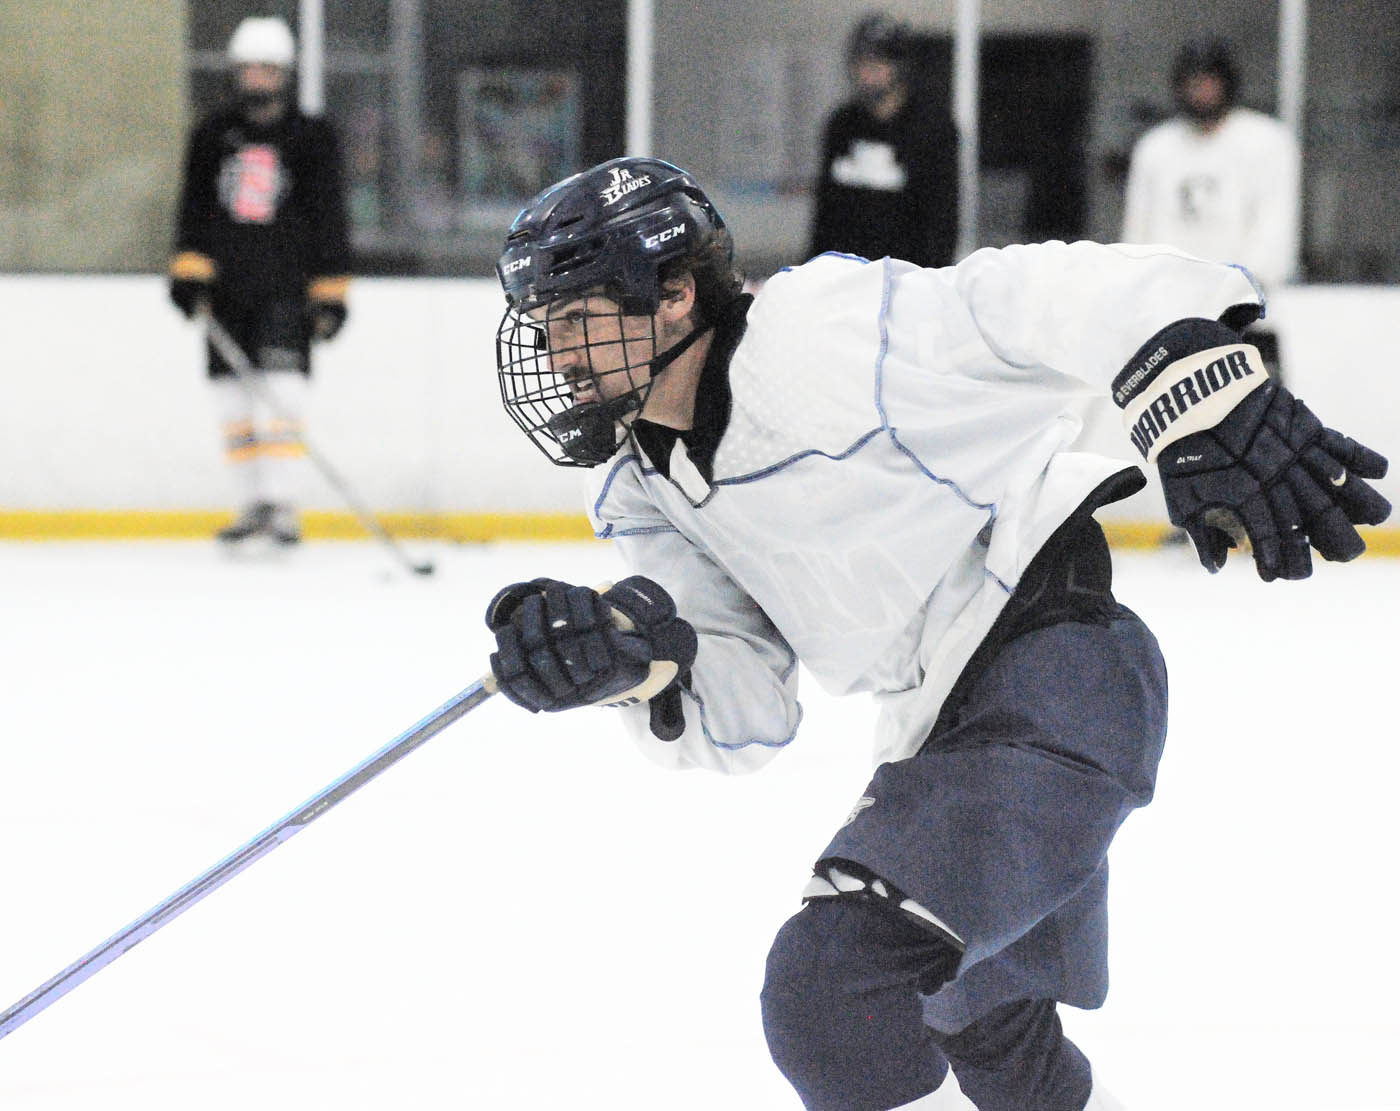 Arizona hockey has grown: A look at some of top talents with state